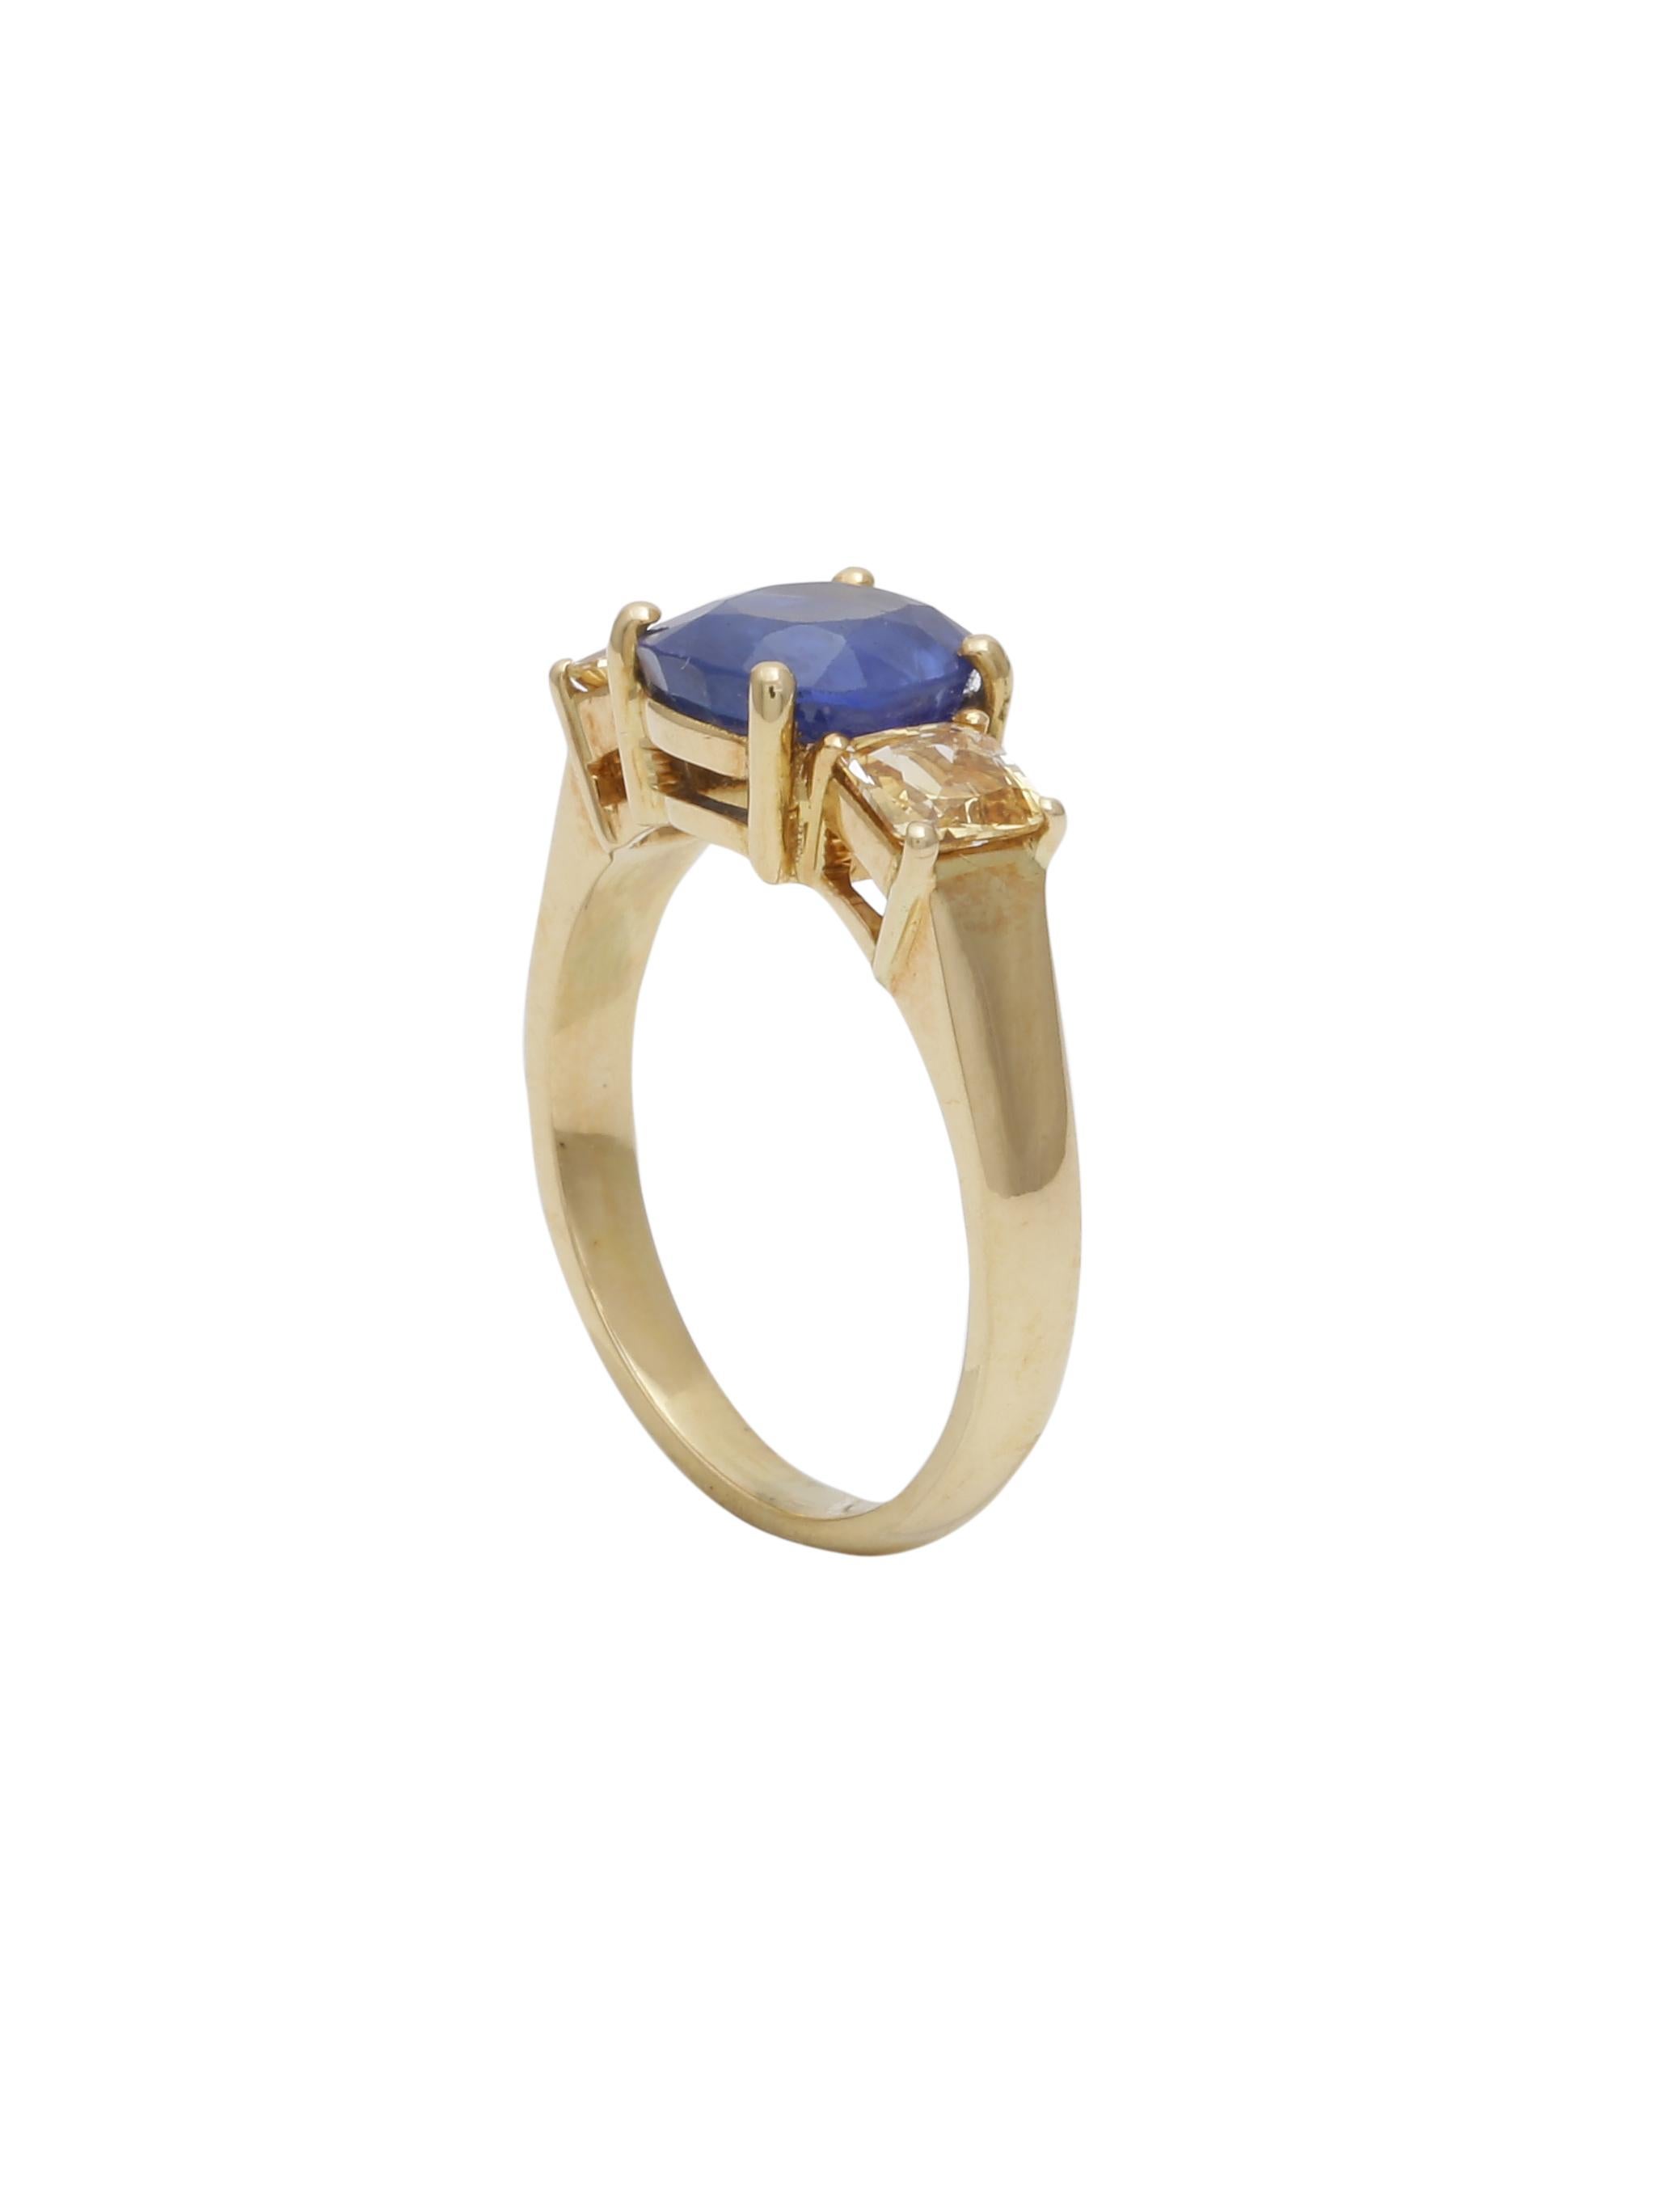 Beautiful 3 stone ring with a 2.51 carats Natural Sapphire centre and 2 small 0.78 carats Yellow Sapphires on the sides. 

For someone looking for a out of the box engagement ring. A everyday wearable ring.

The centre Blue Sapphire is Natural and